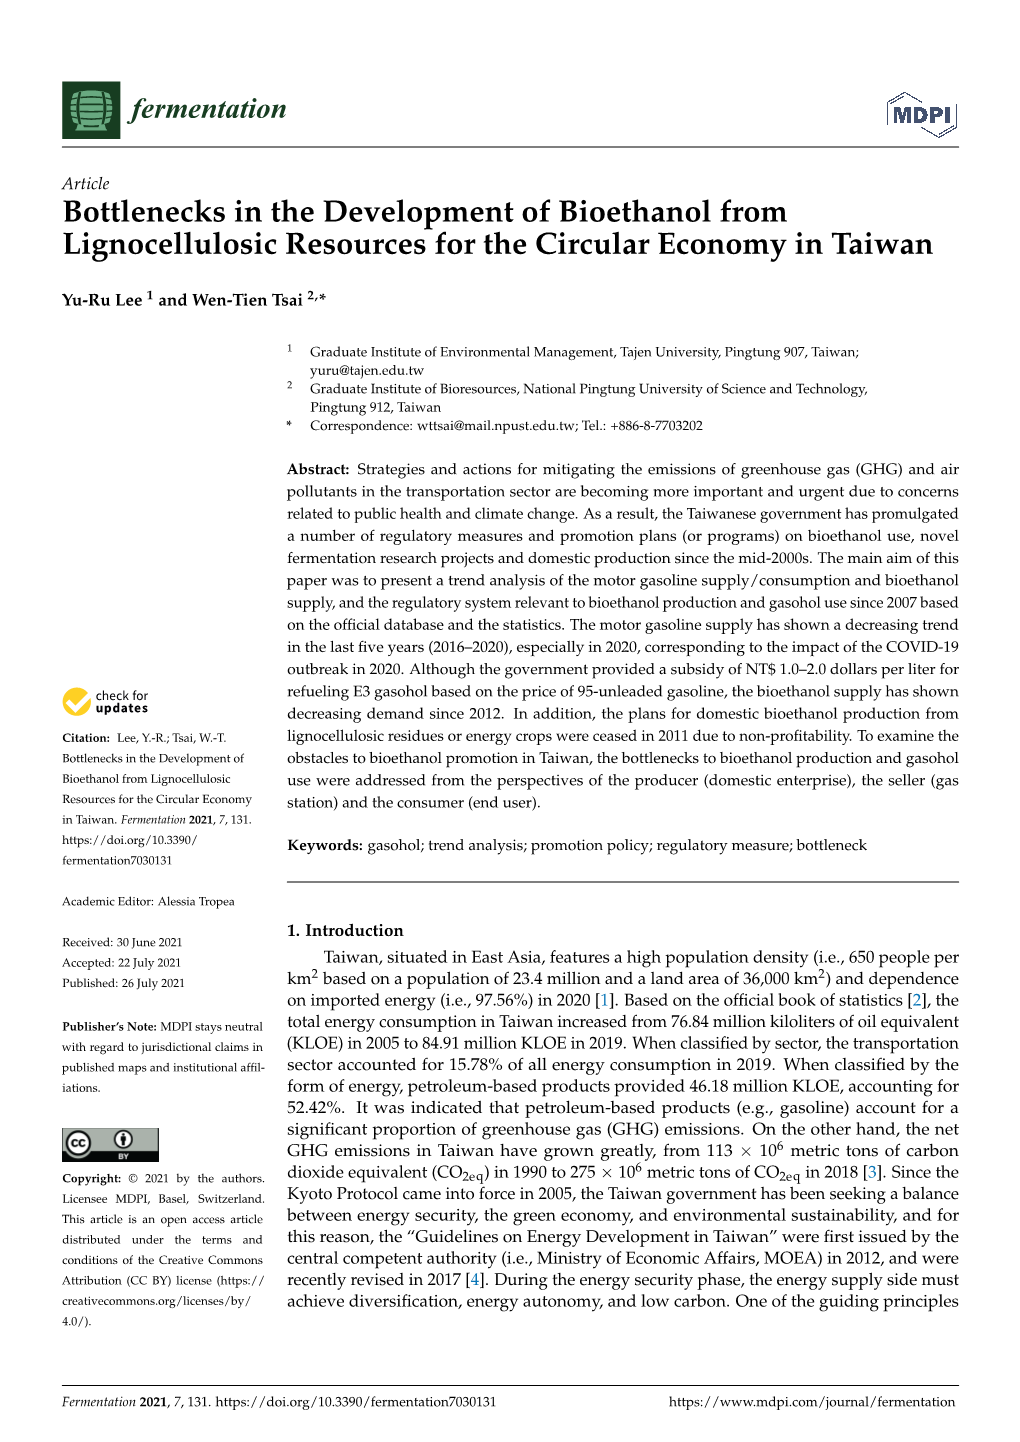 Bottlenecks in the Development of Bioethanol from Lignocellulosic Resources for the Circular Economy in Taiwan